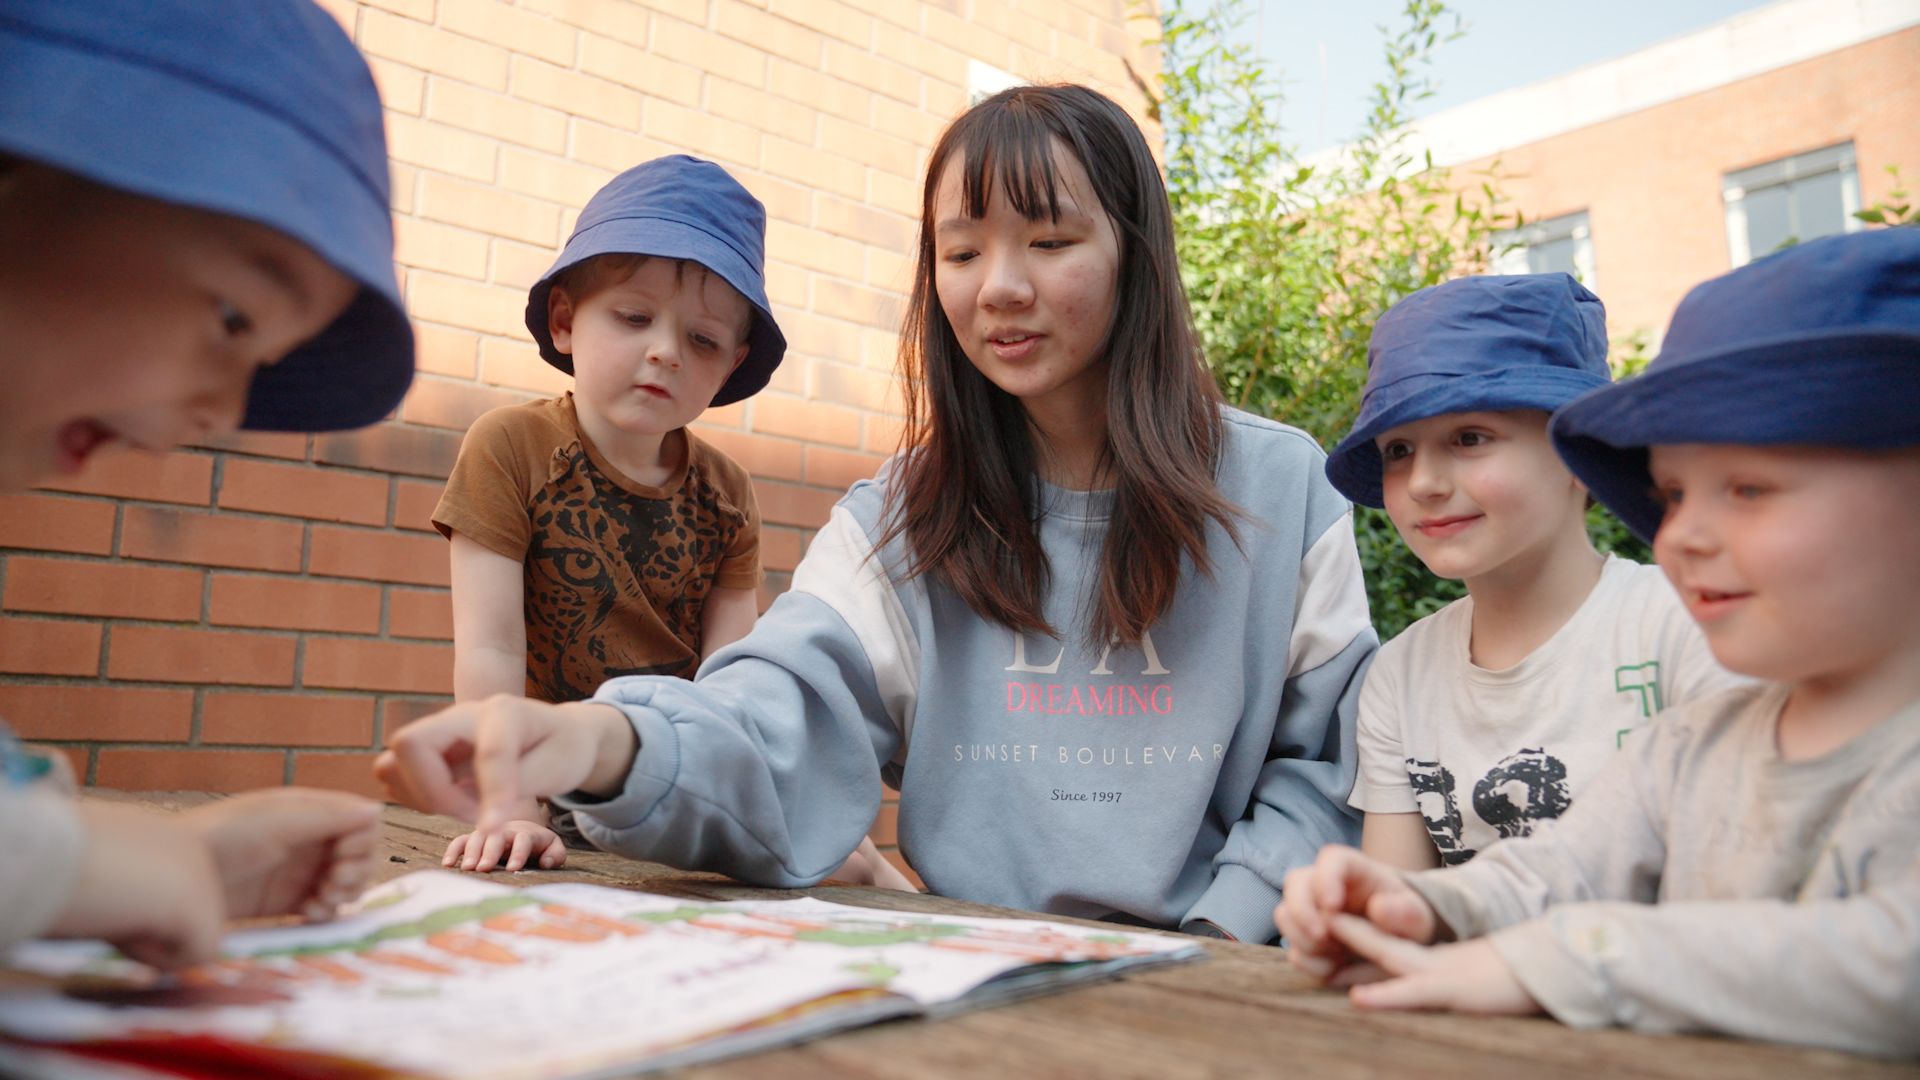 Leeds student Hongqin You interacting with four young children around a table outside, pointing at a book.